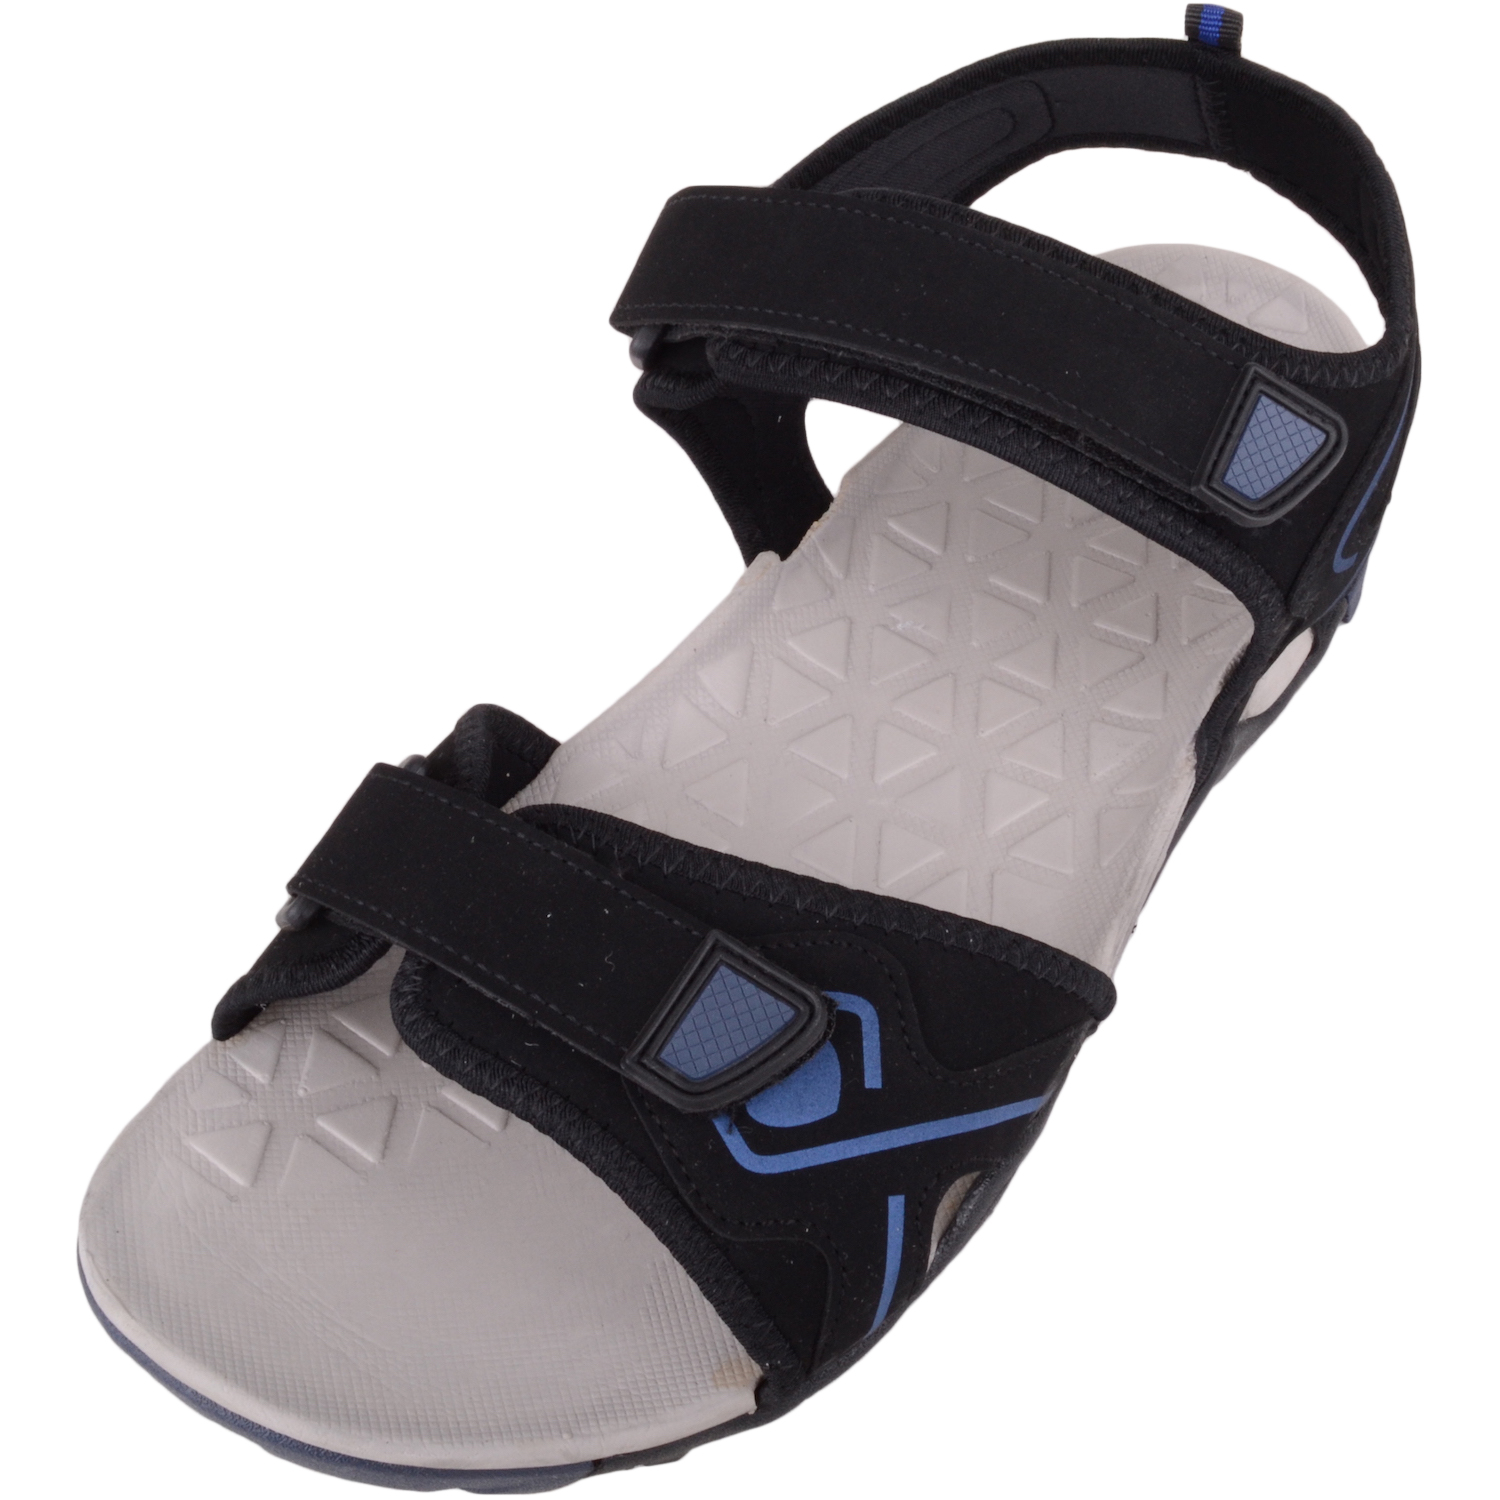 Men's Beach Sandals with Touch Fastening - Absolute Footwear